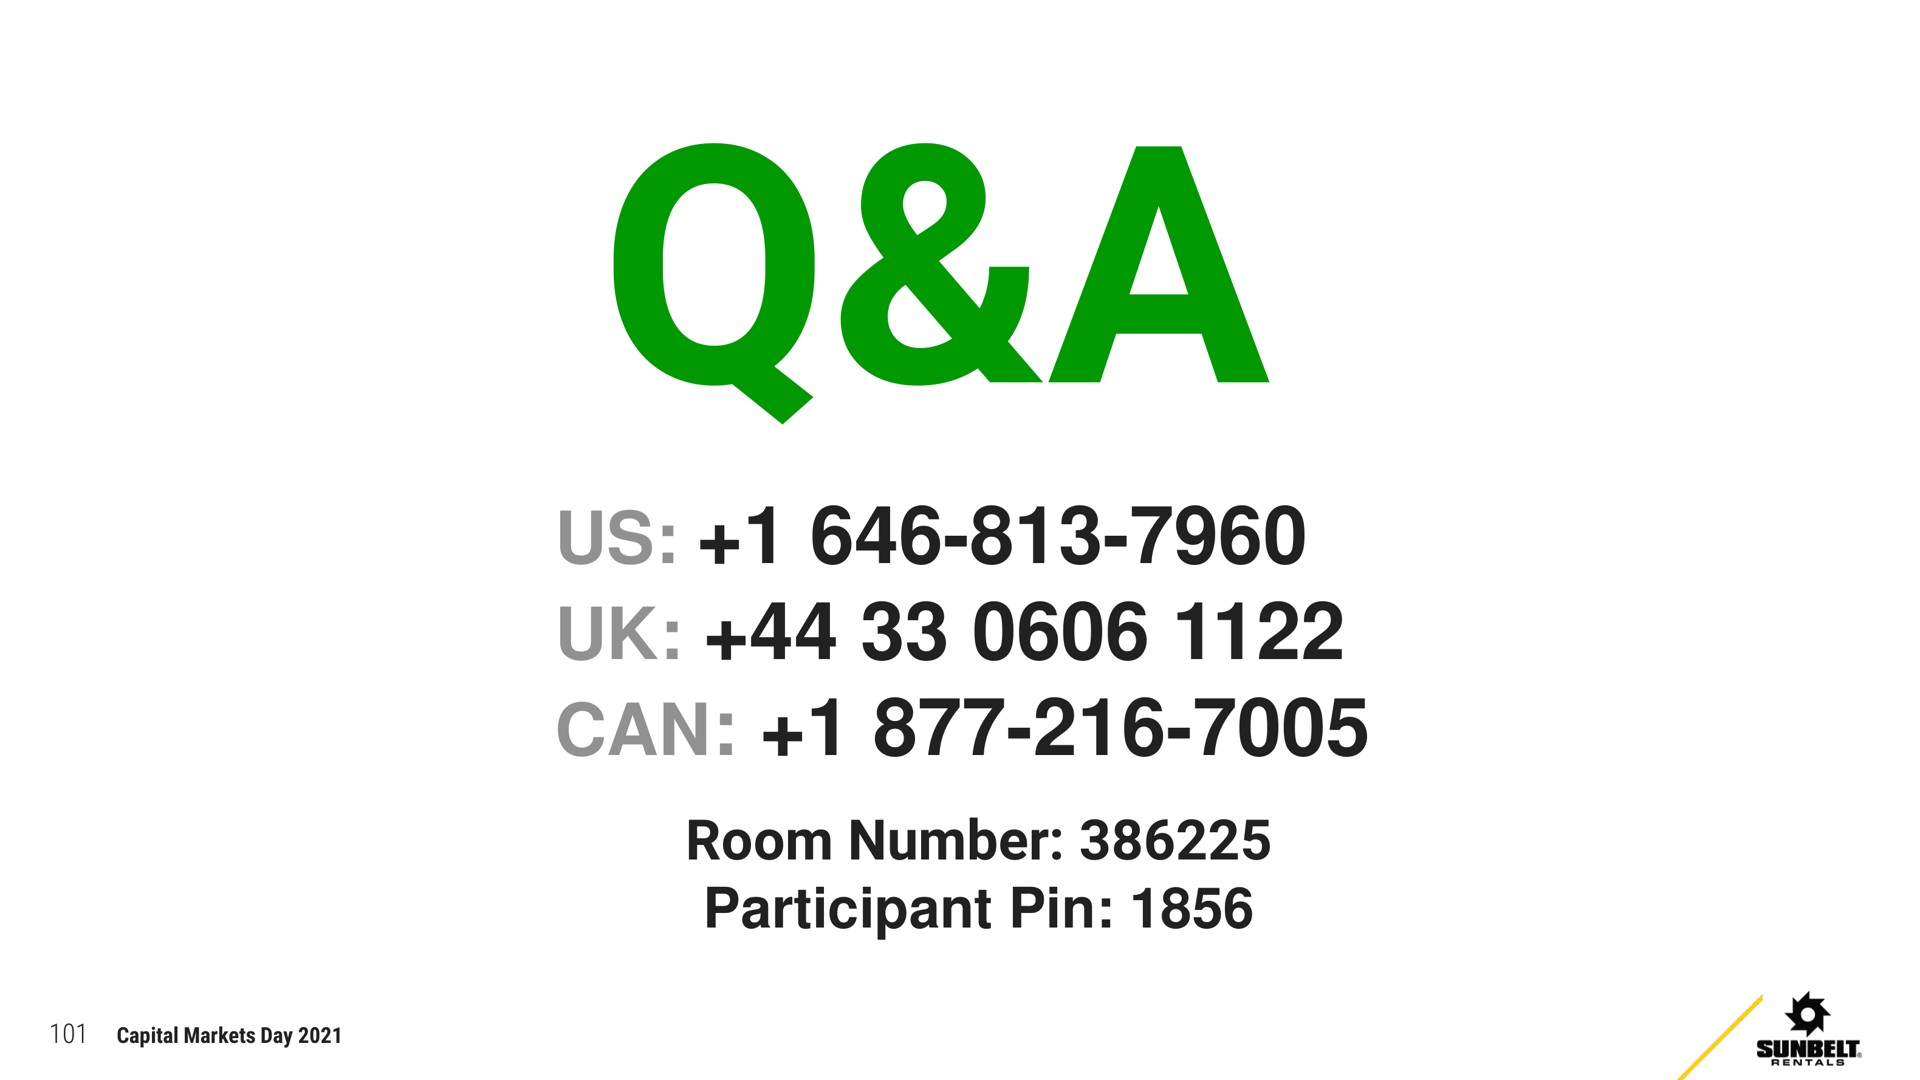 a us can room number participant pin | Ashtead Group